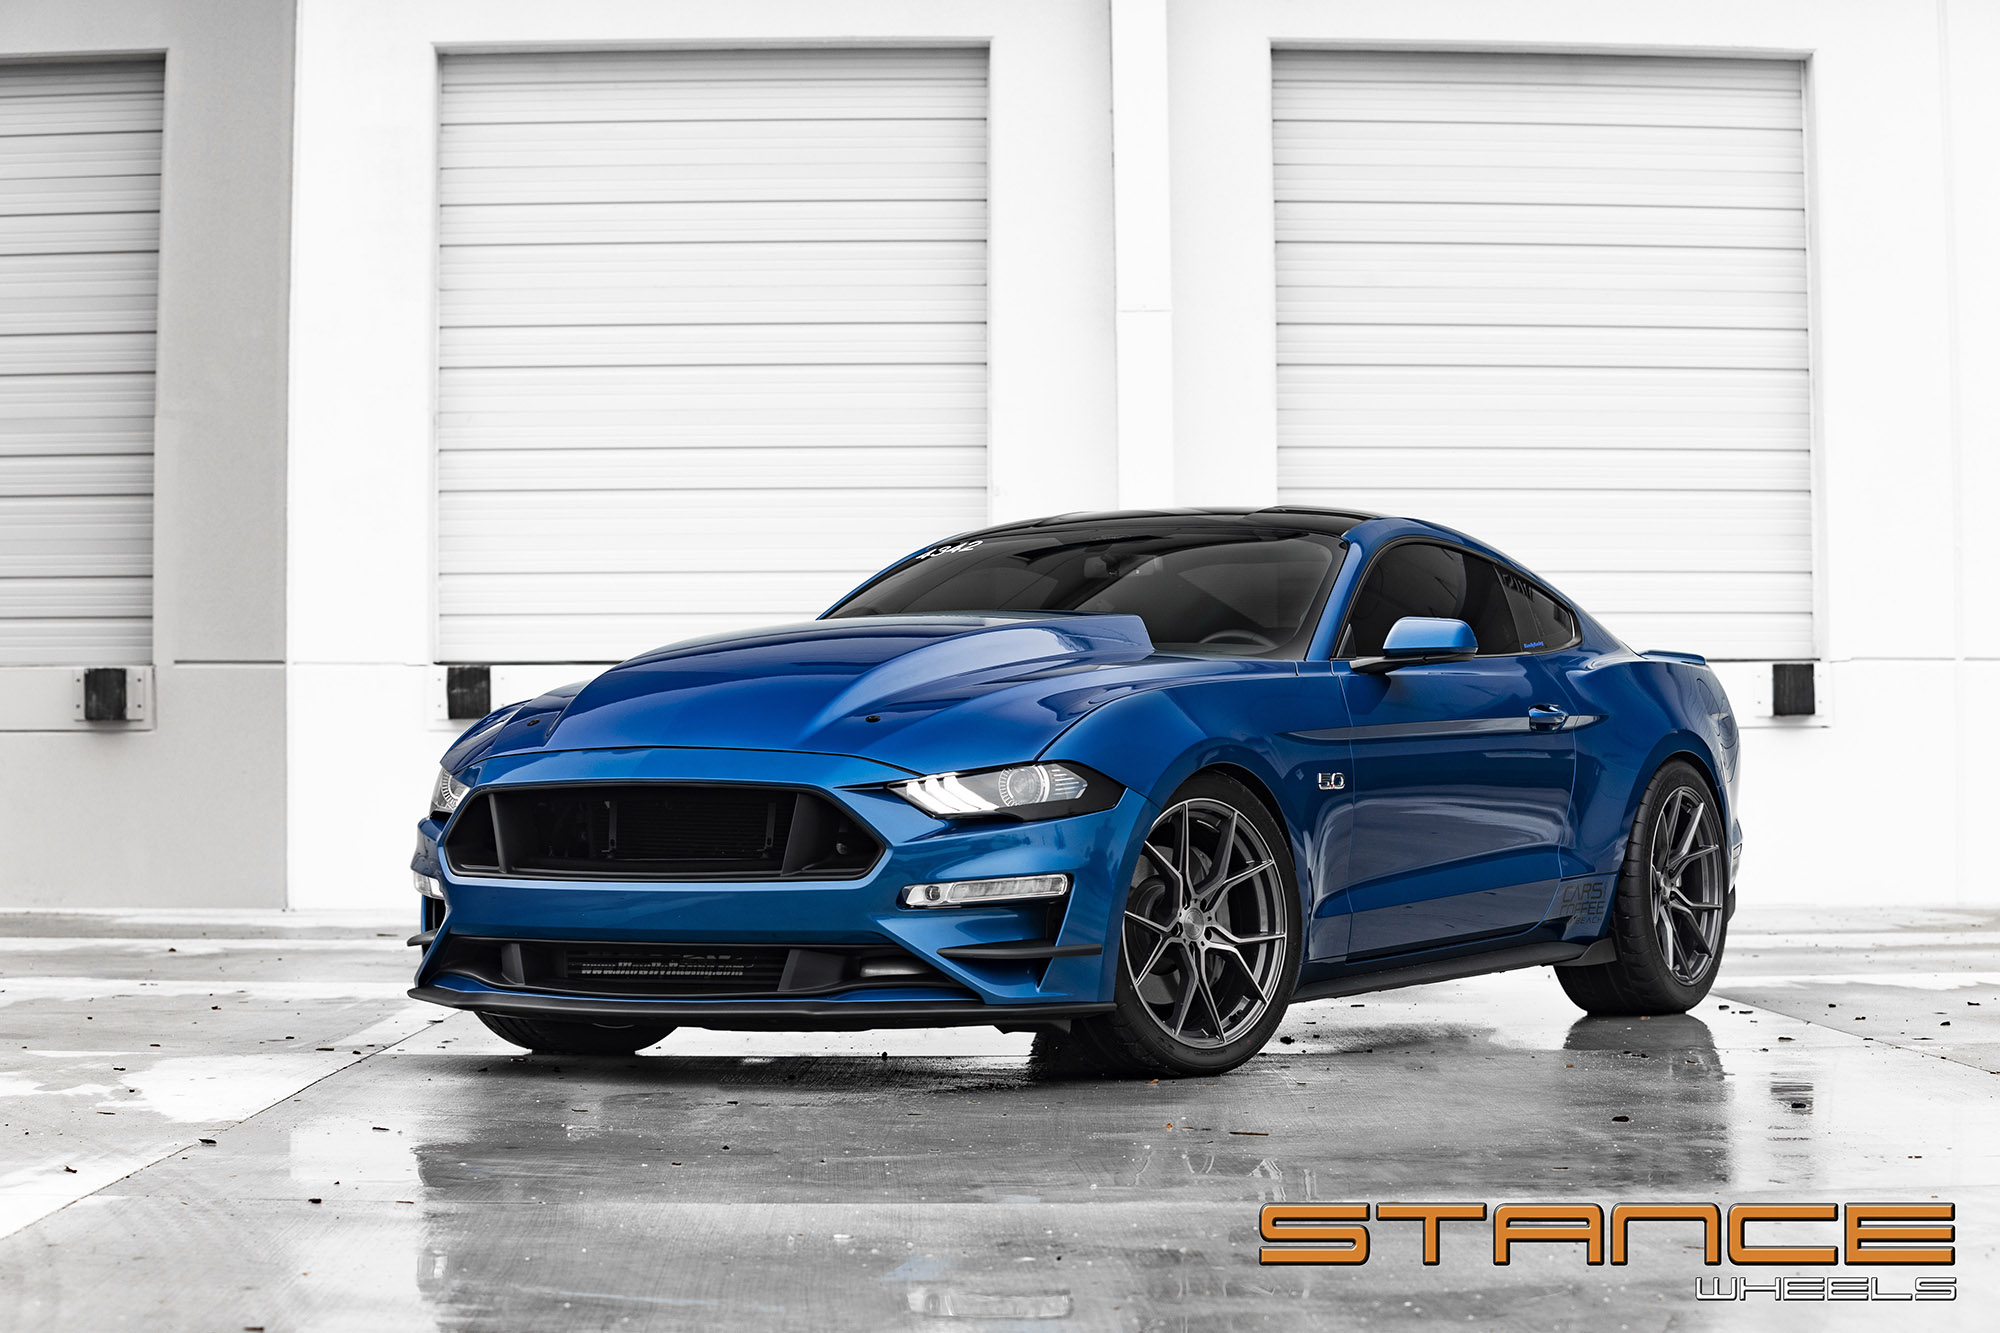 S650 Mustang Authorize Dealer Stance: Rotary Forged SF Series Wheels For Mustang S650 stance forum 7